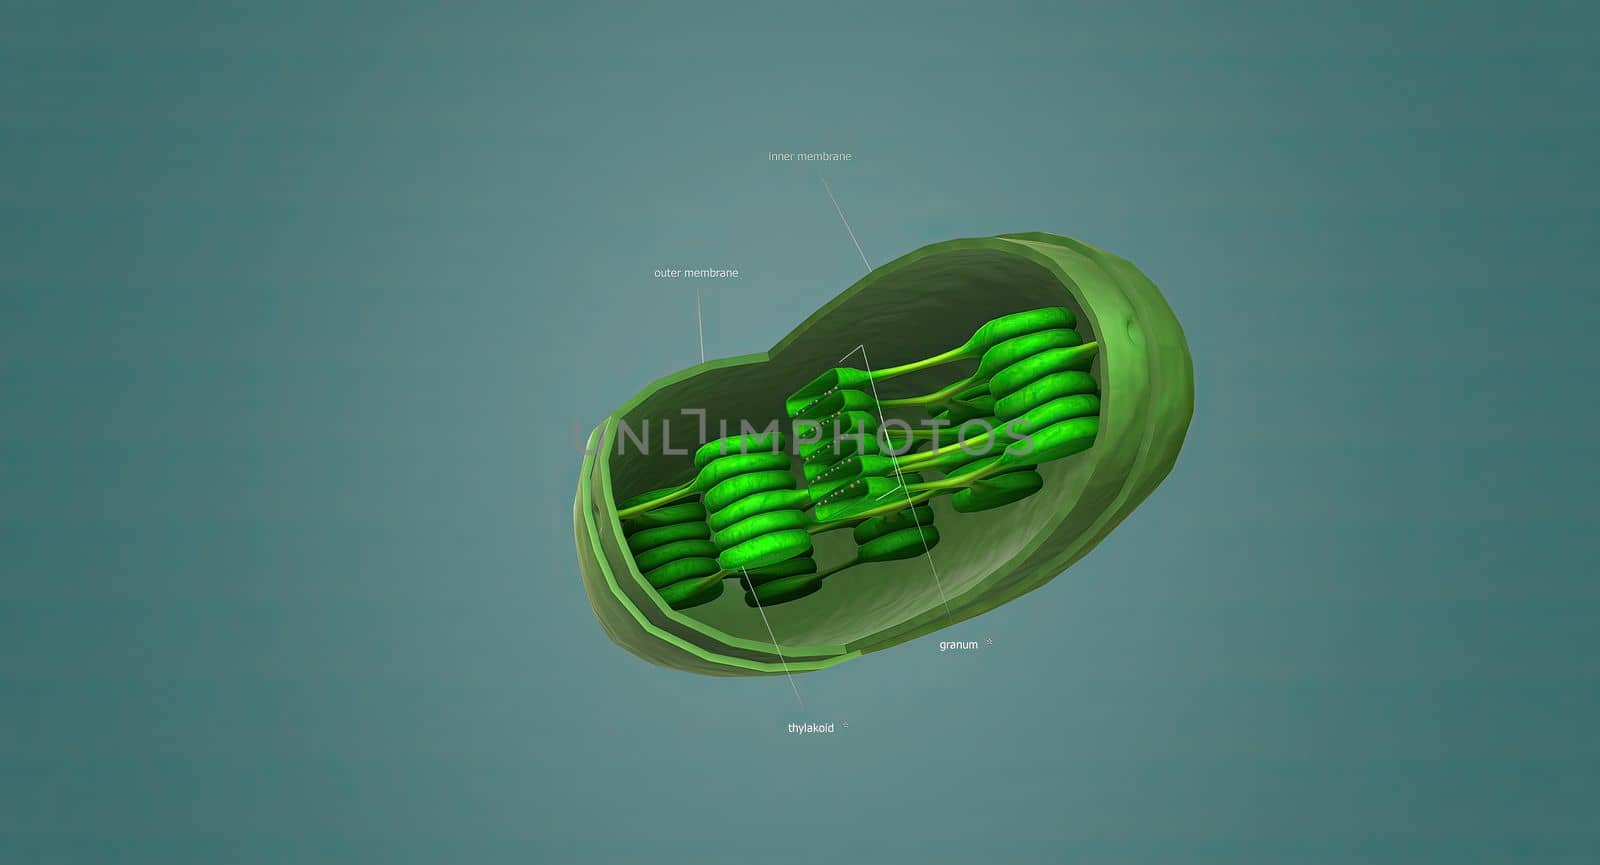 Mitochondria an organelle found in the cells of most Eukaryotes, such as animals, plants and fungi.